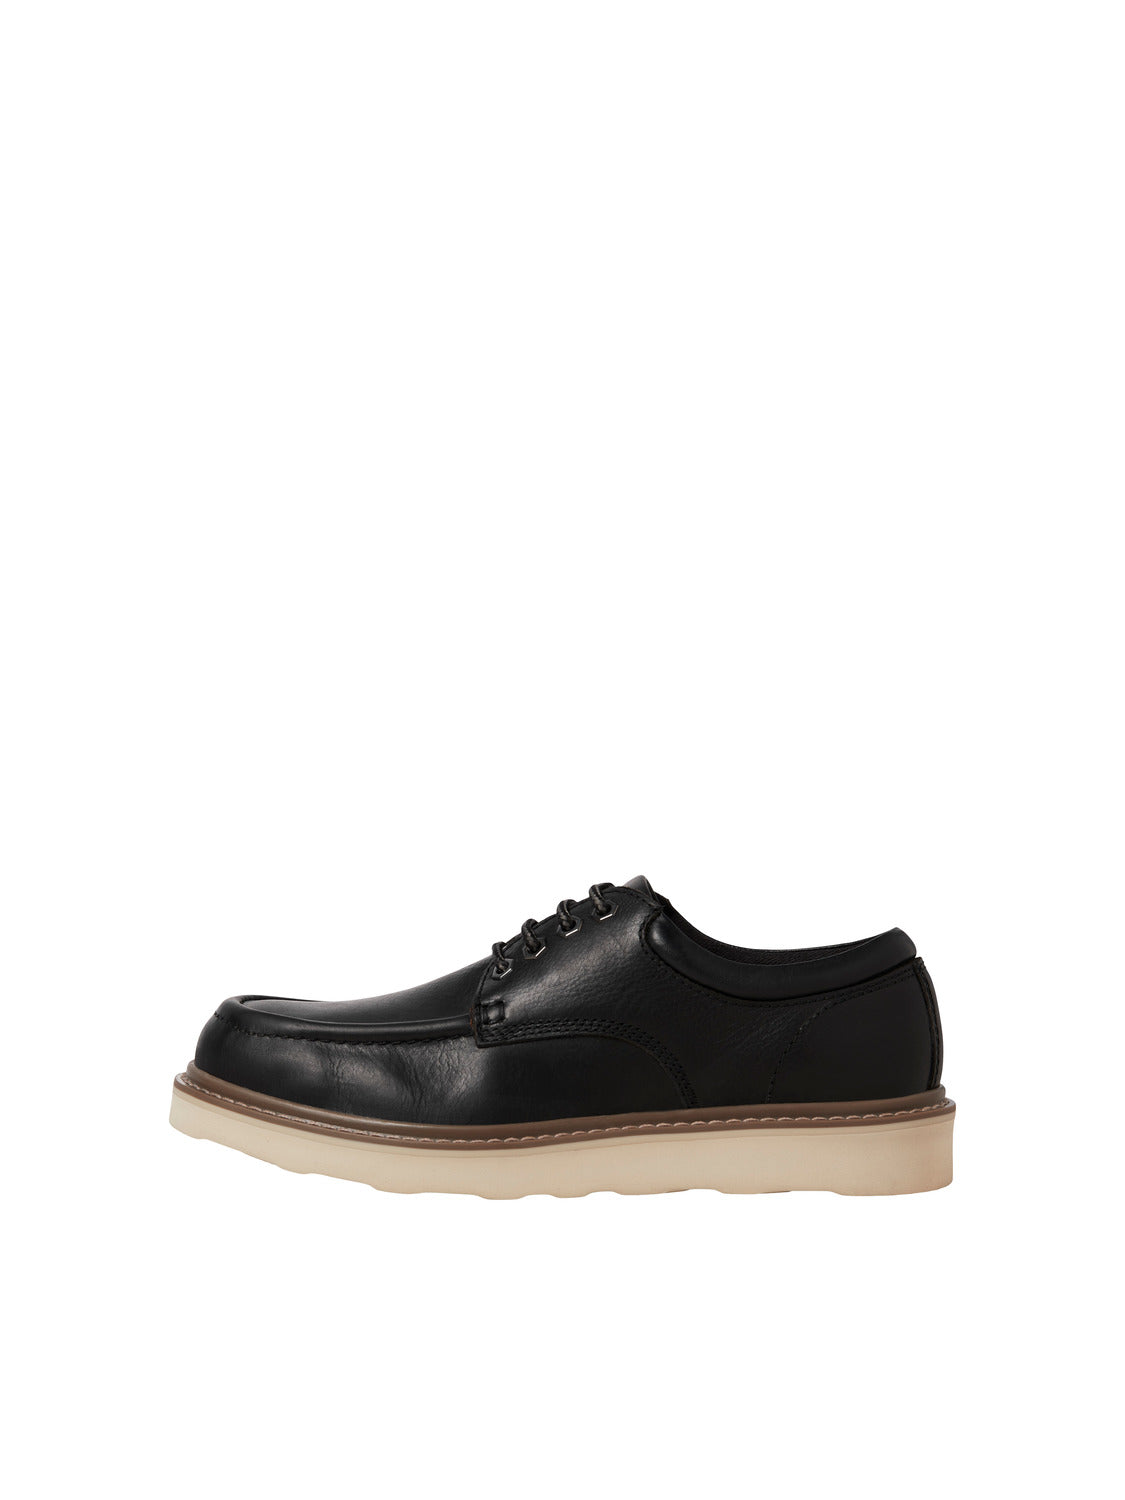 JFWALDGATE Shoes - Anthracite